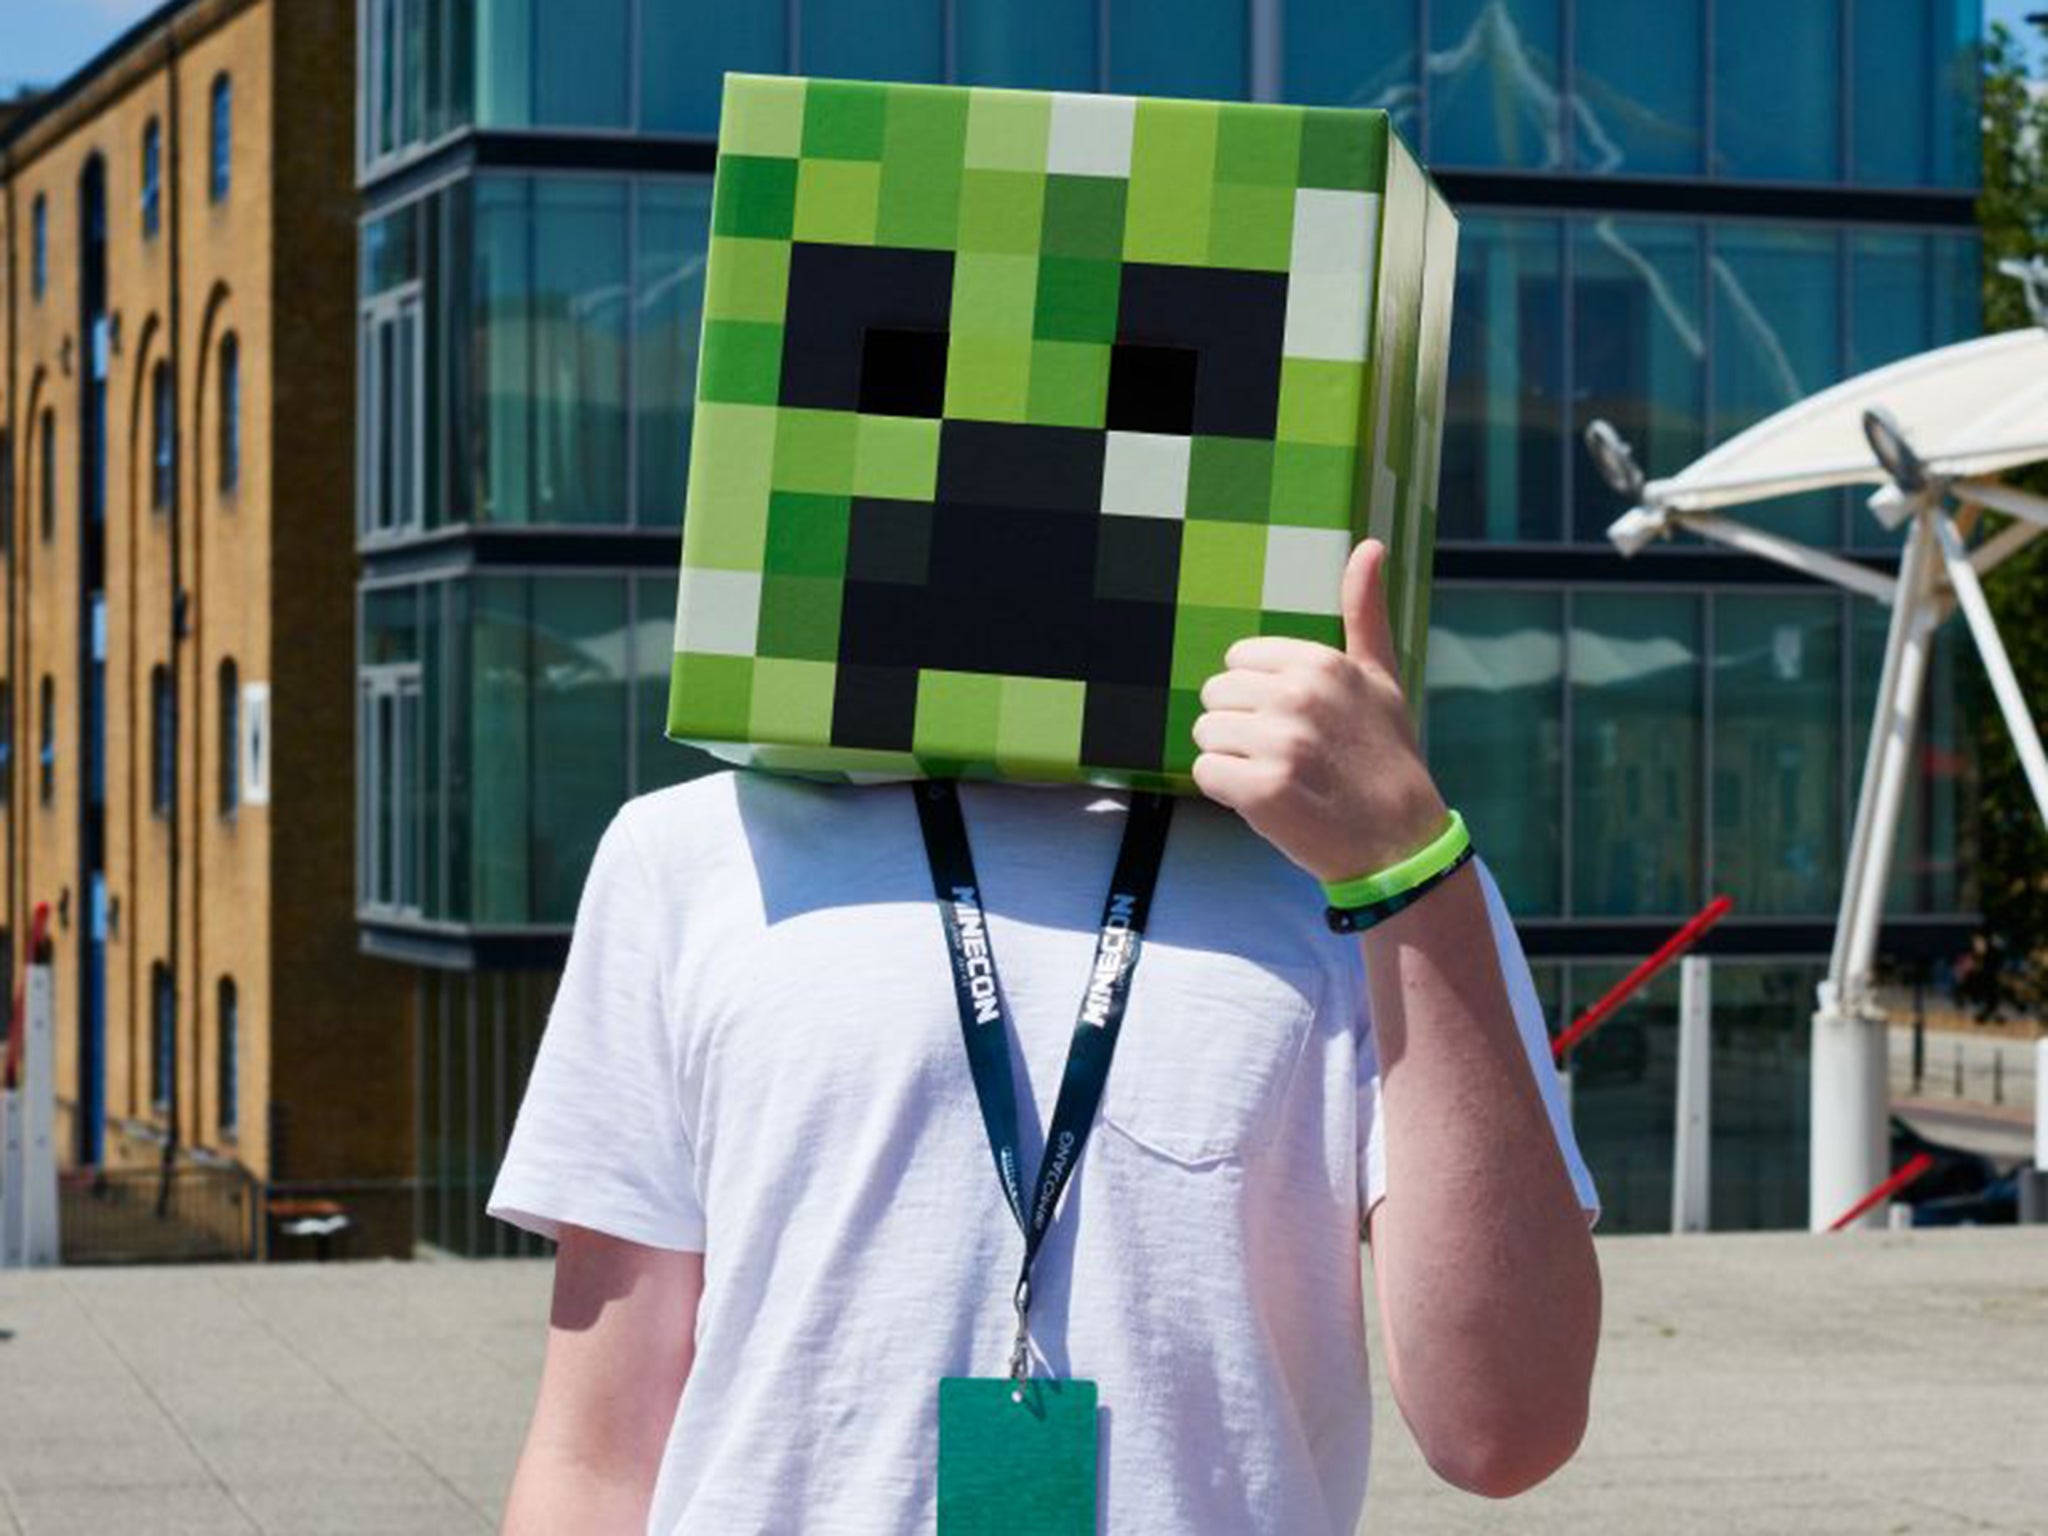 Minecon 2015 Minecraft Fans Descend In Their Thousands For Record Breaking Convention The